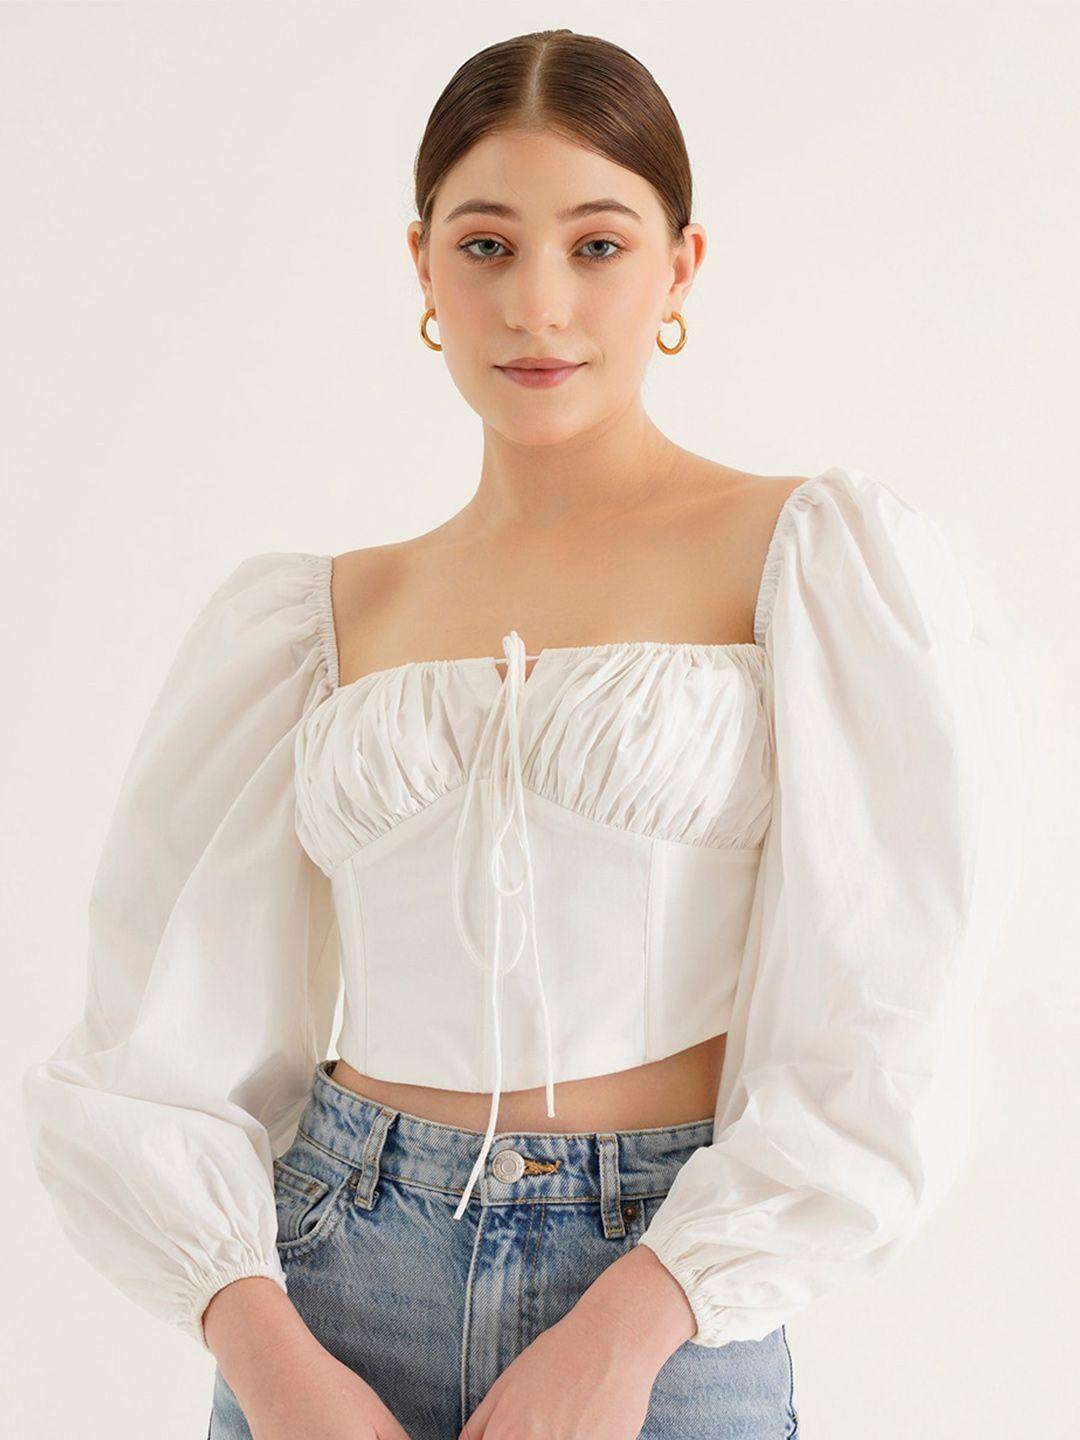 ipso-facto-puff-sleeves-cotton-crop-fitted-top